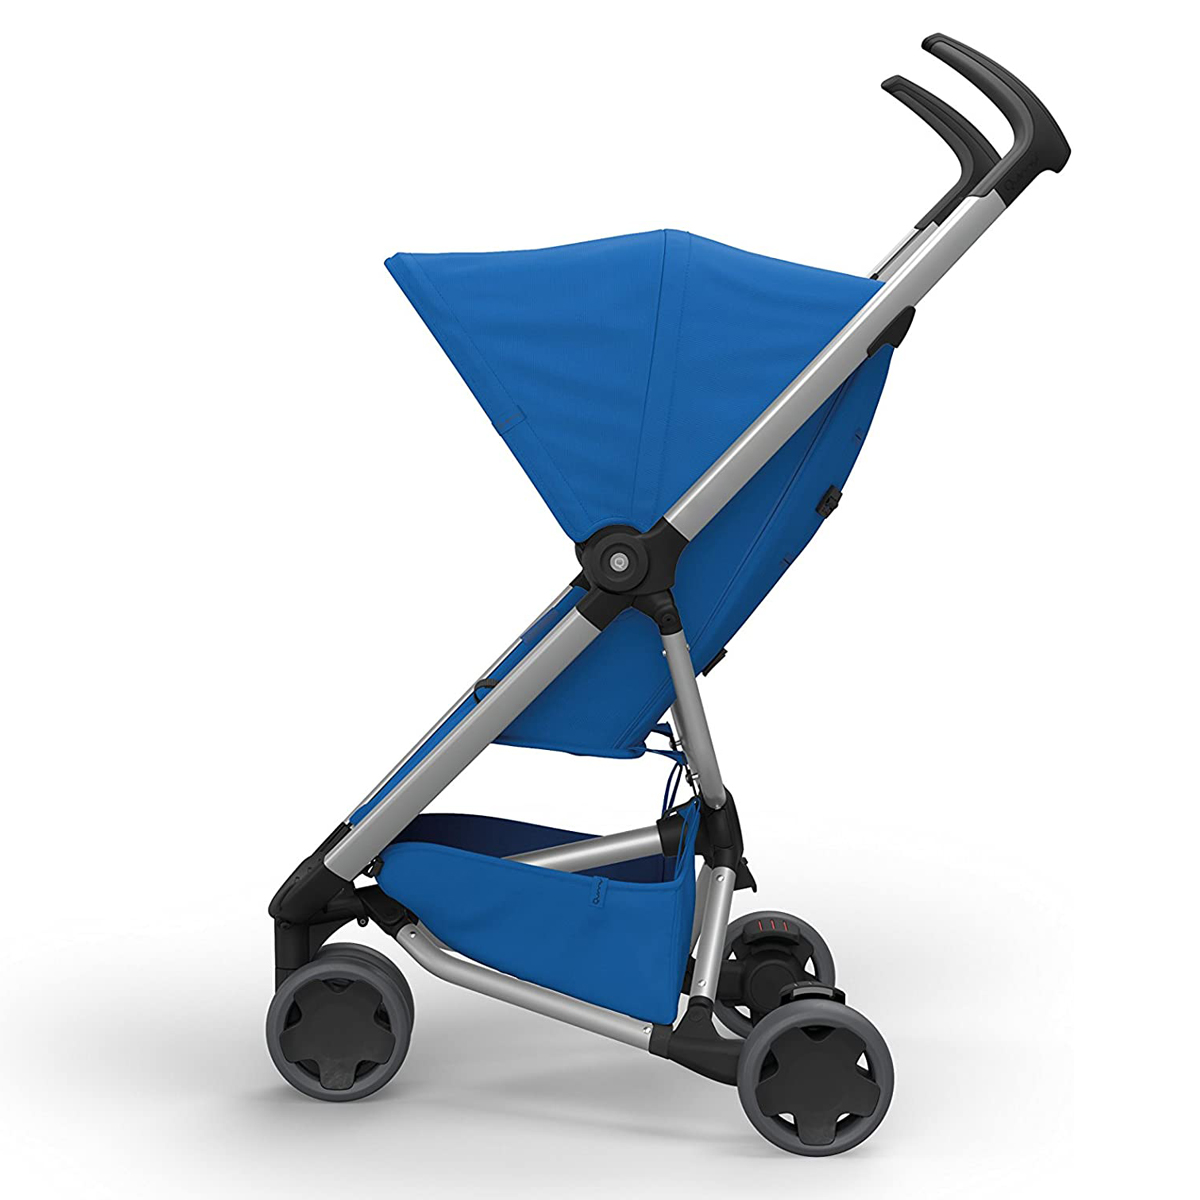 High Quality Baby Stroller Can Be Used For Sitting, Lying, Children's Trolley, Umbrella Cart, 0-4 Years Old